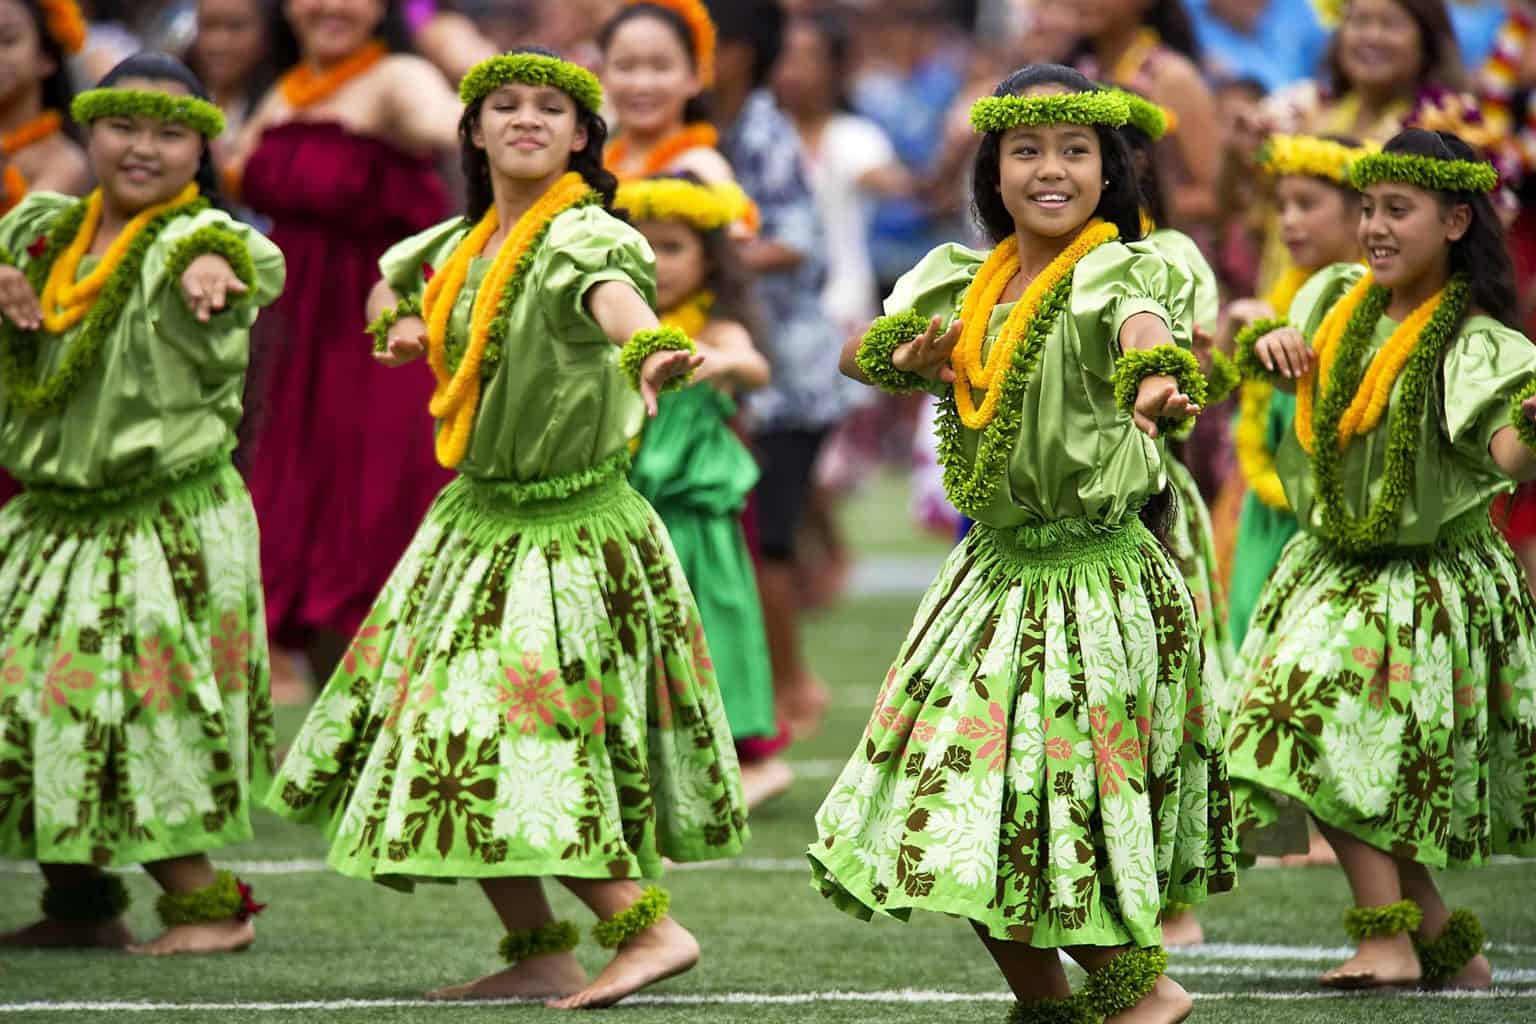 Girl's in Green Dress Dancing during Daytime